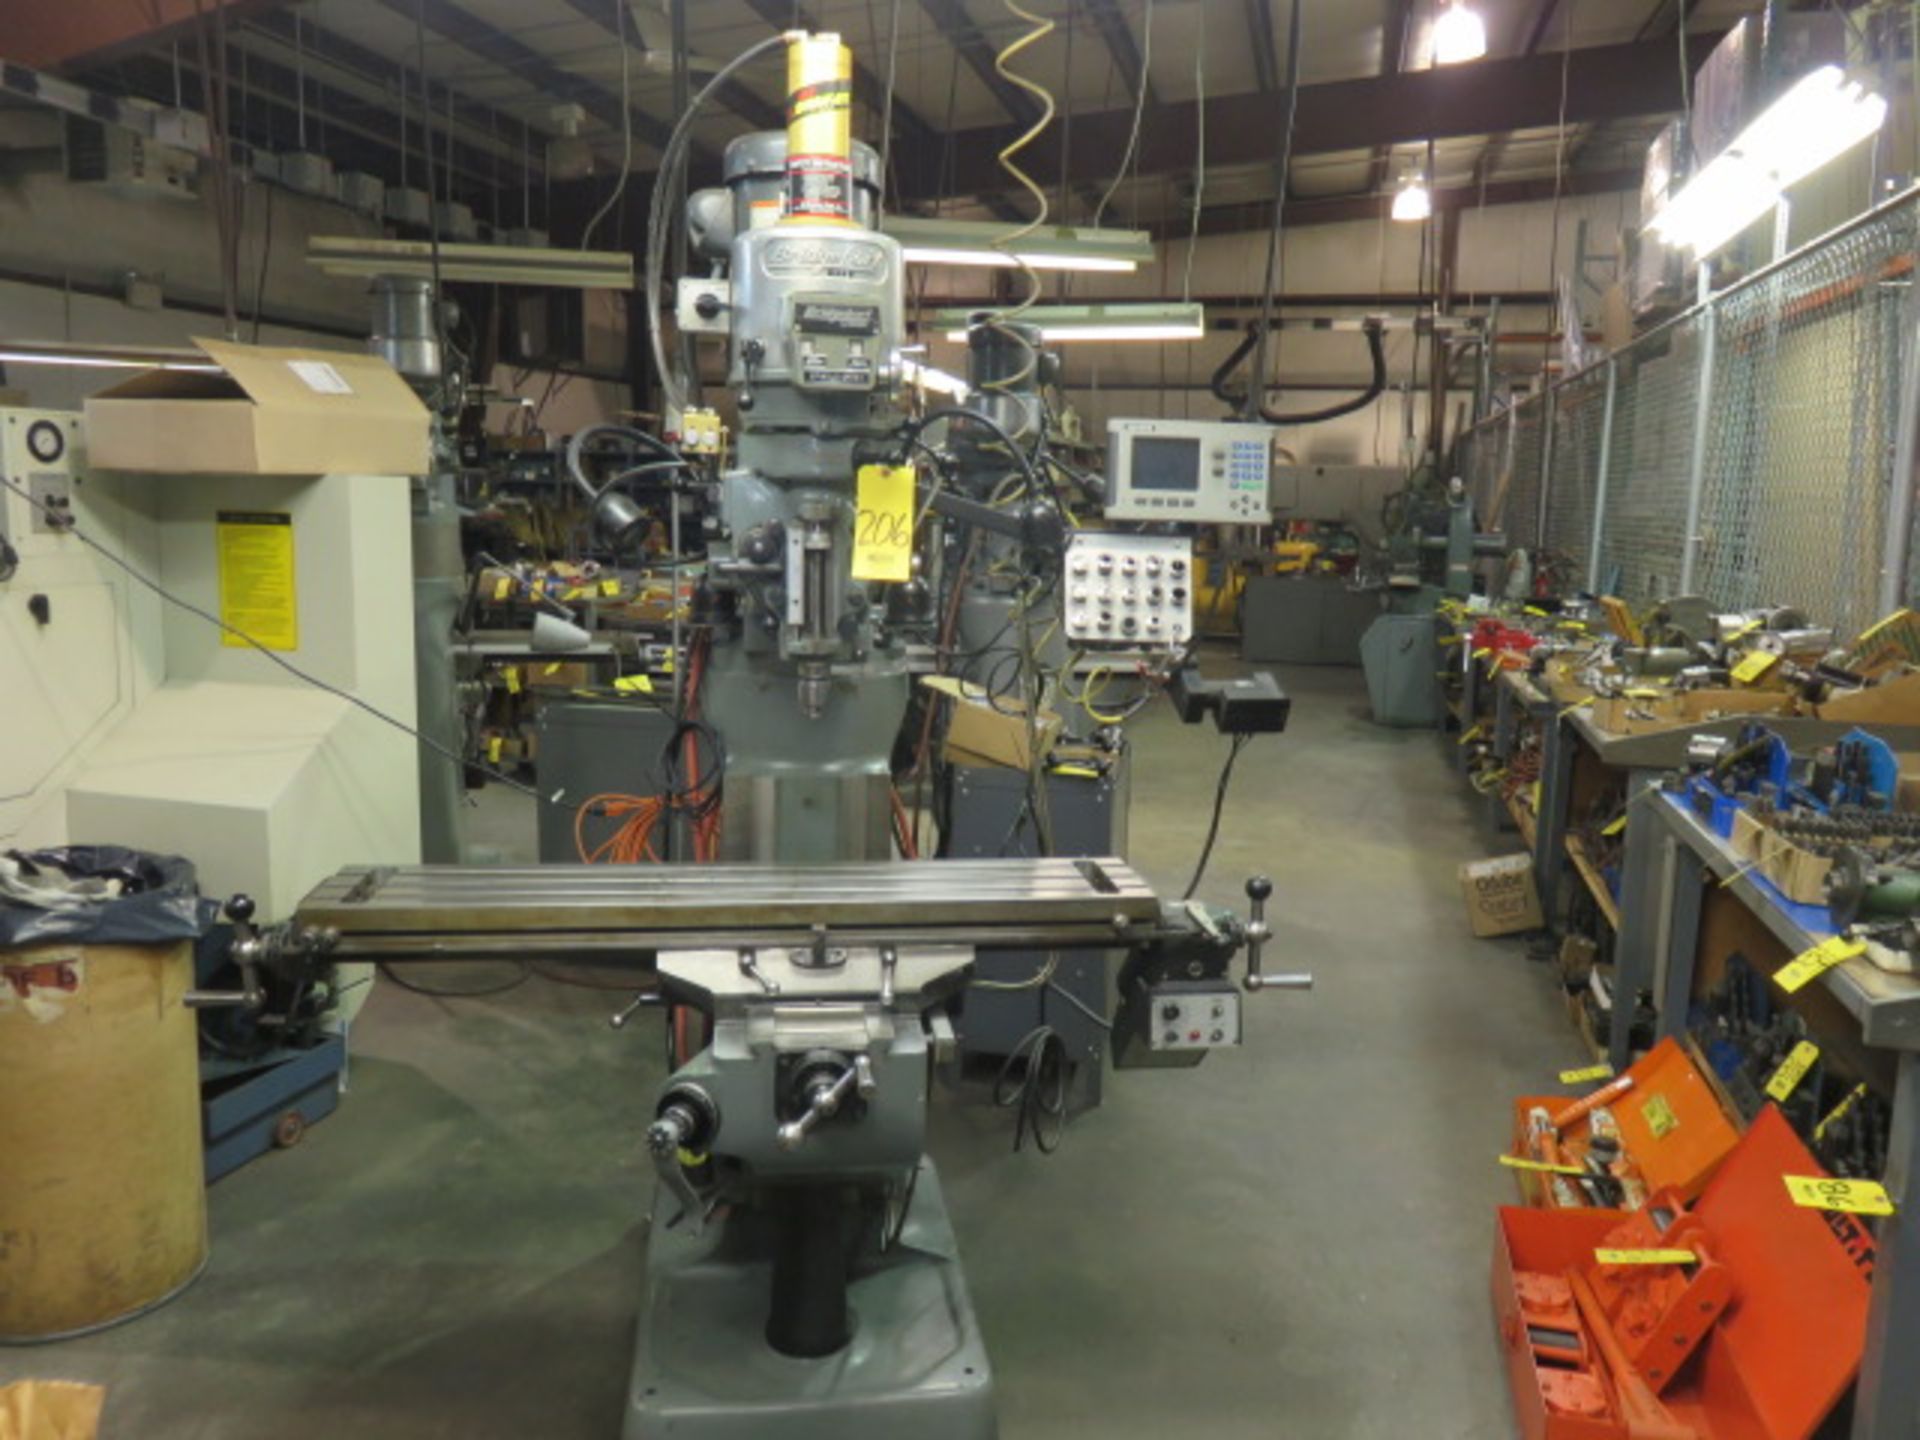 2008 BRIDGEPORT (HARDINGE) 2J VS VERTICAL MILL, S/N HDNG 3926, 2HP, 9 IN. X 48 IN. PF TABLE WITH…